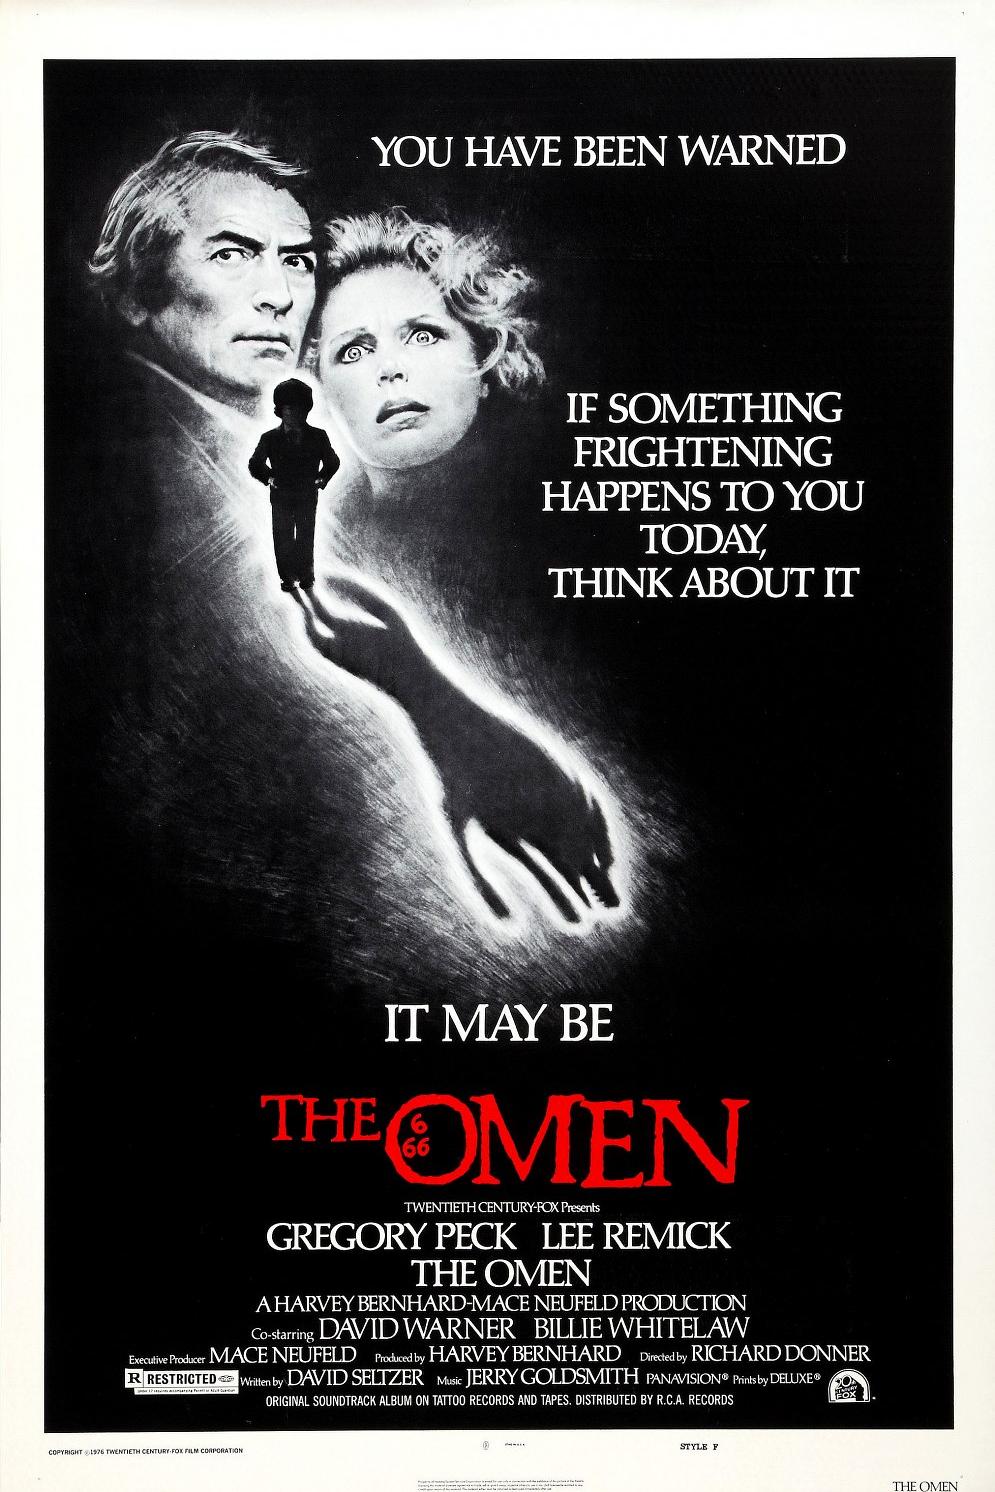 /ħ The.Omen.1976.REMASTERED.1080p.BluRay.X264-AMIABLE 12.03GB-1.png